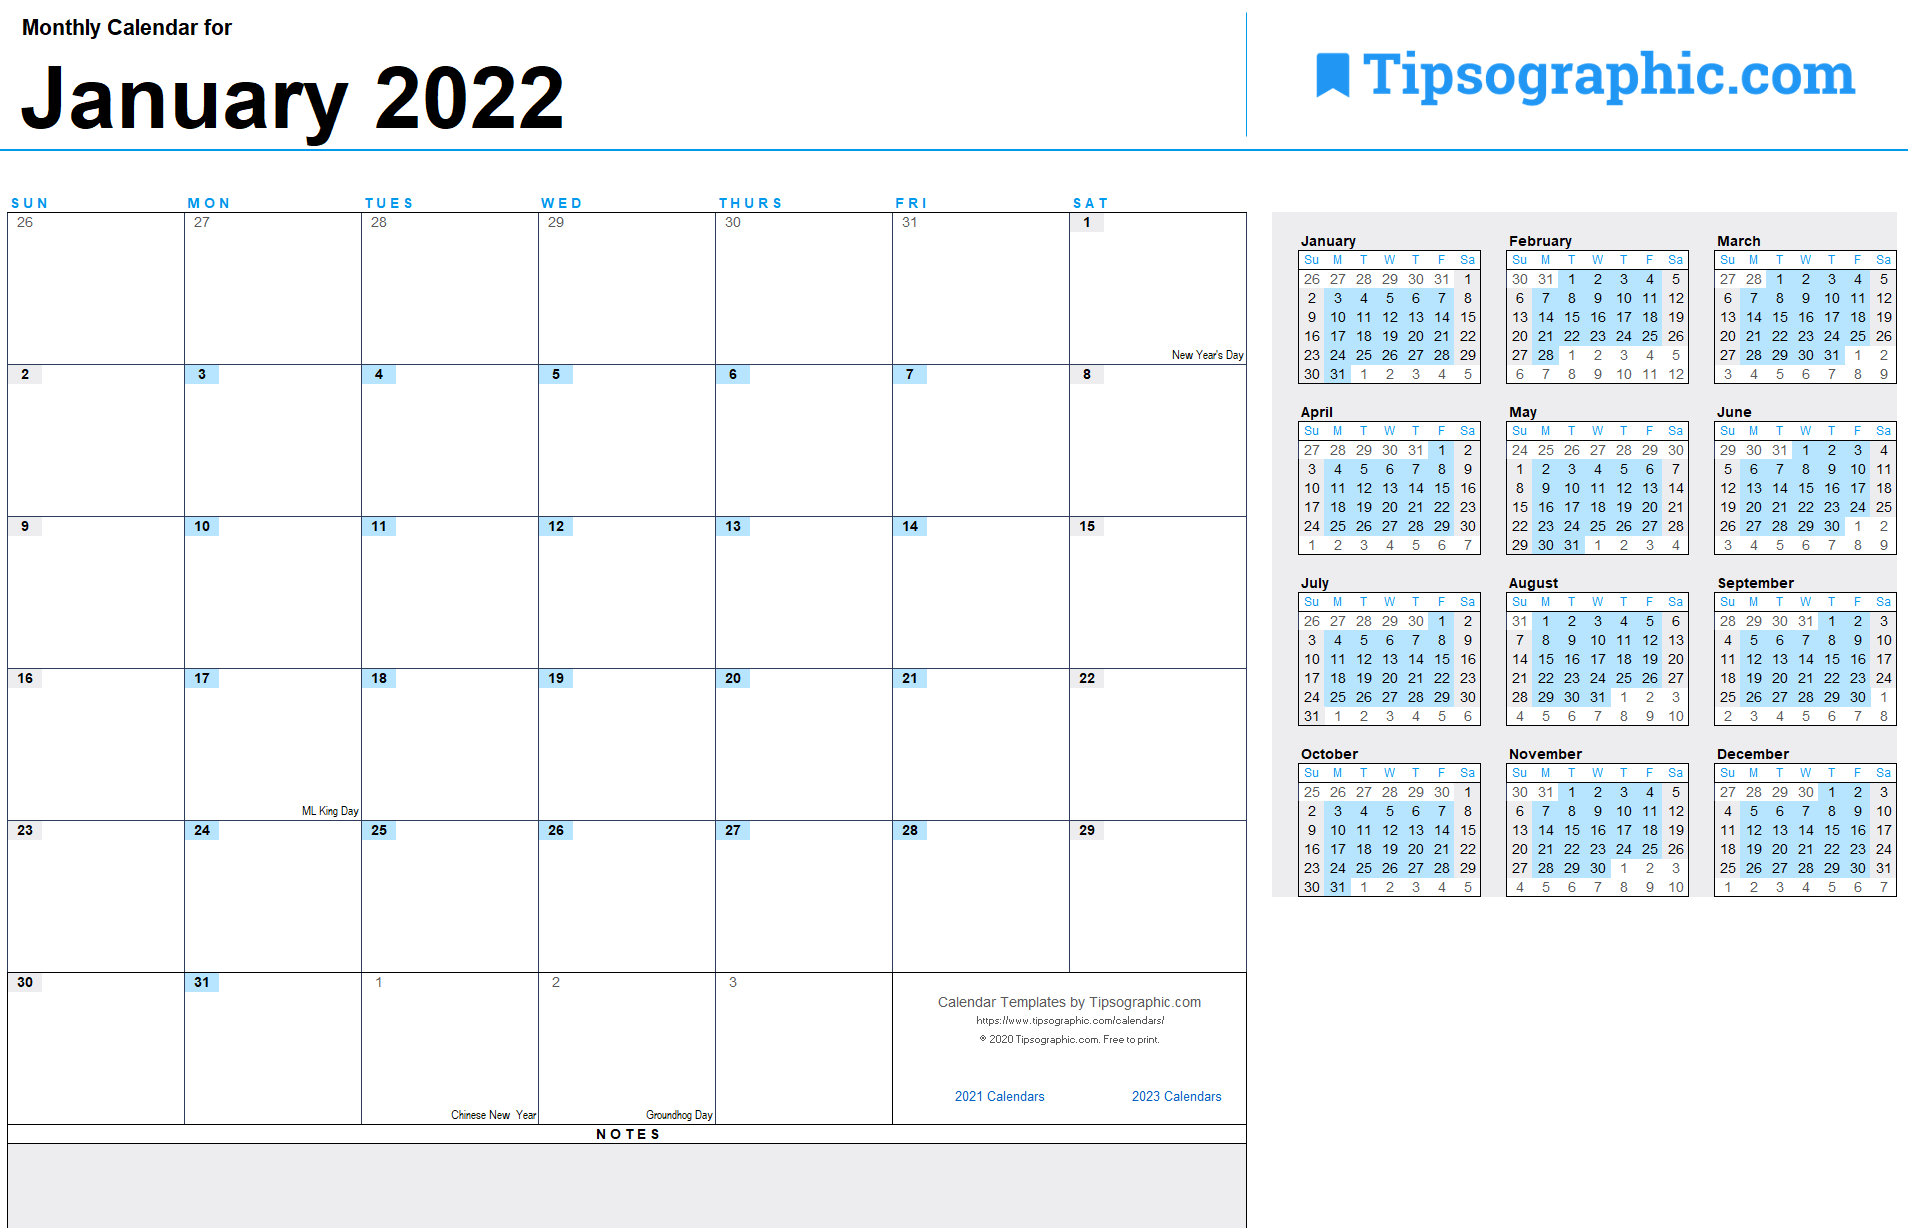 2022 monthly calendar excel tipsographic